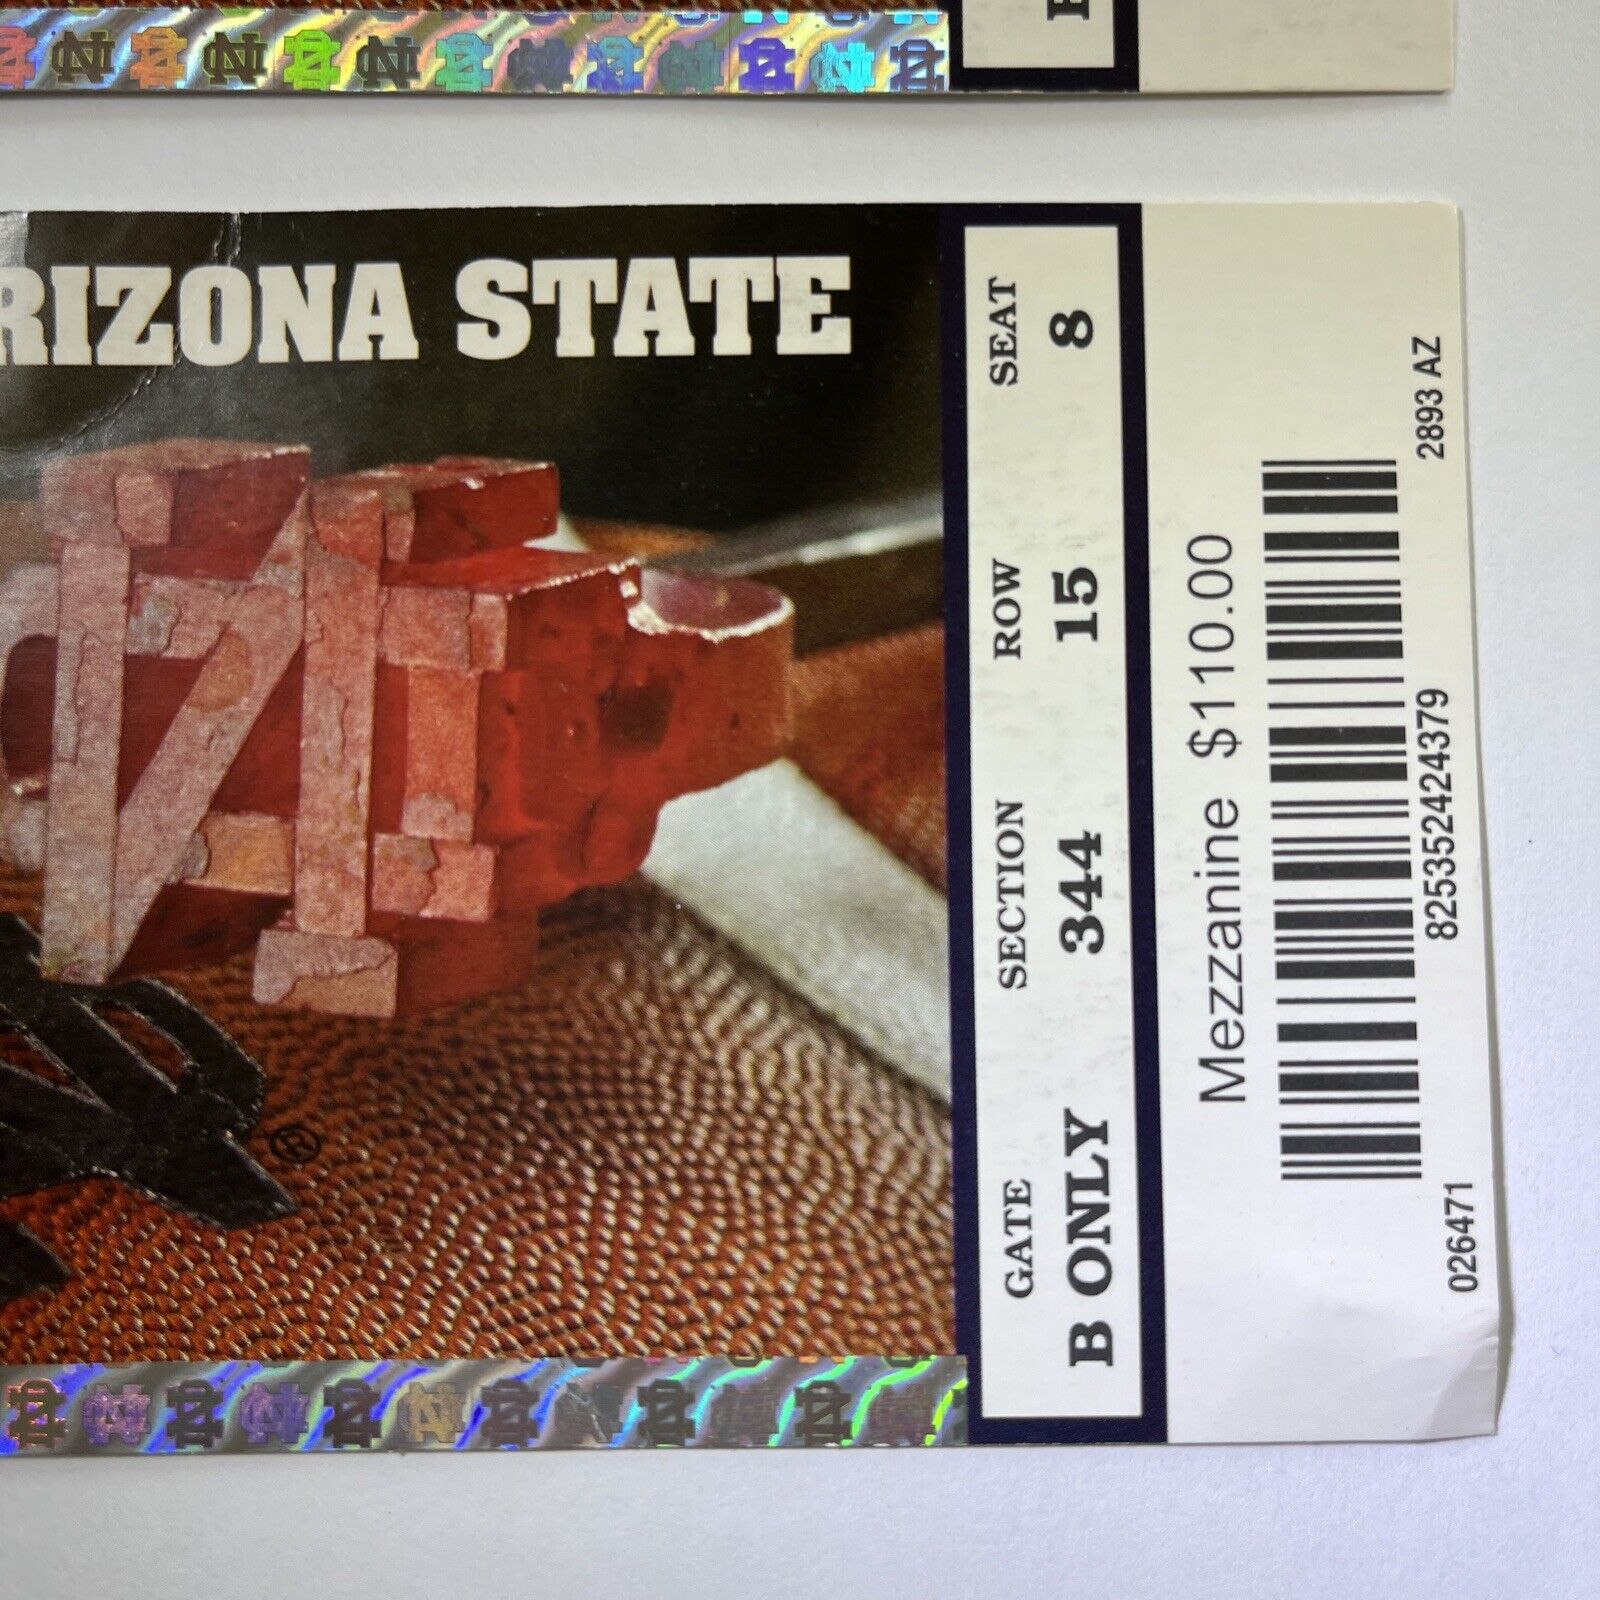 2013 Shamrock Series Full Tickets (2) Notre Dame v Arizona State Tommy Rees 279